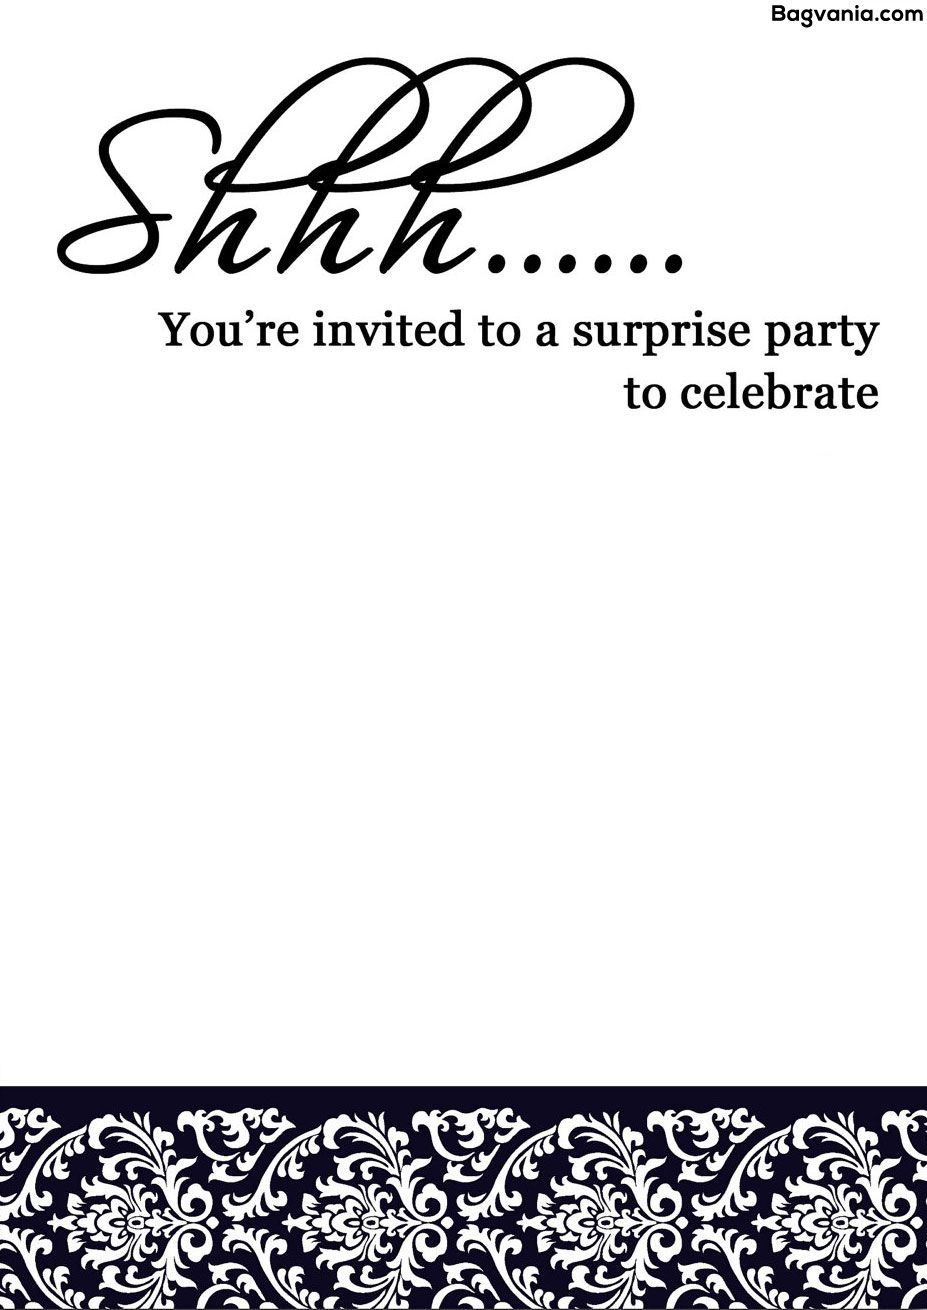 Free Printable Surprise Birthday Invitations Bagvania Free intended for proportions 927 X 1310